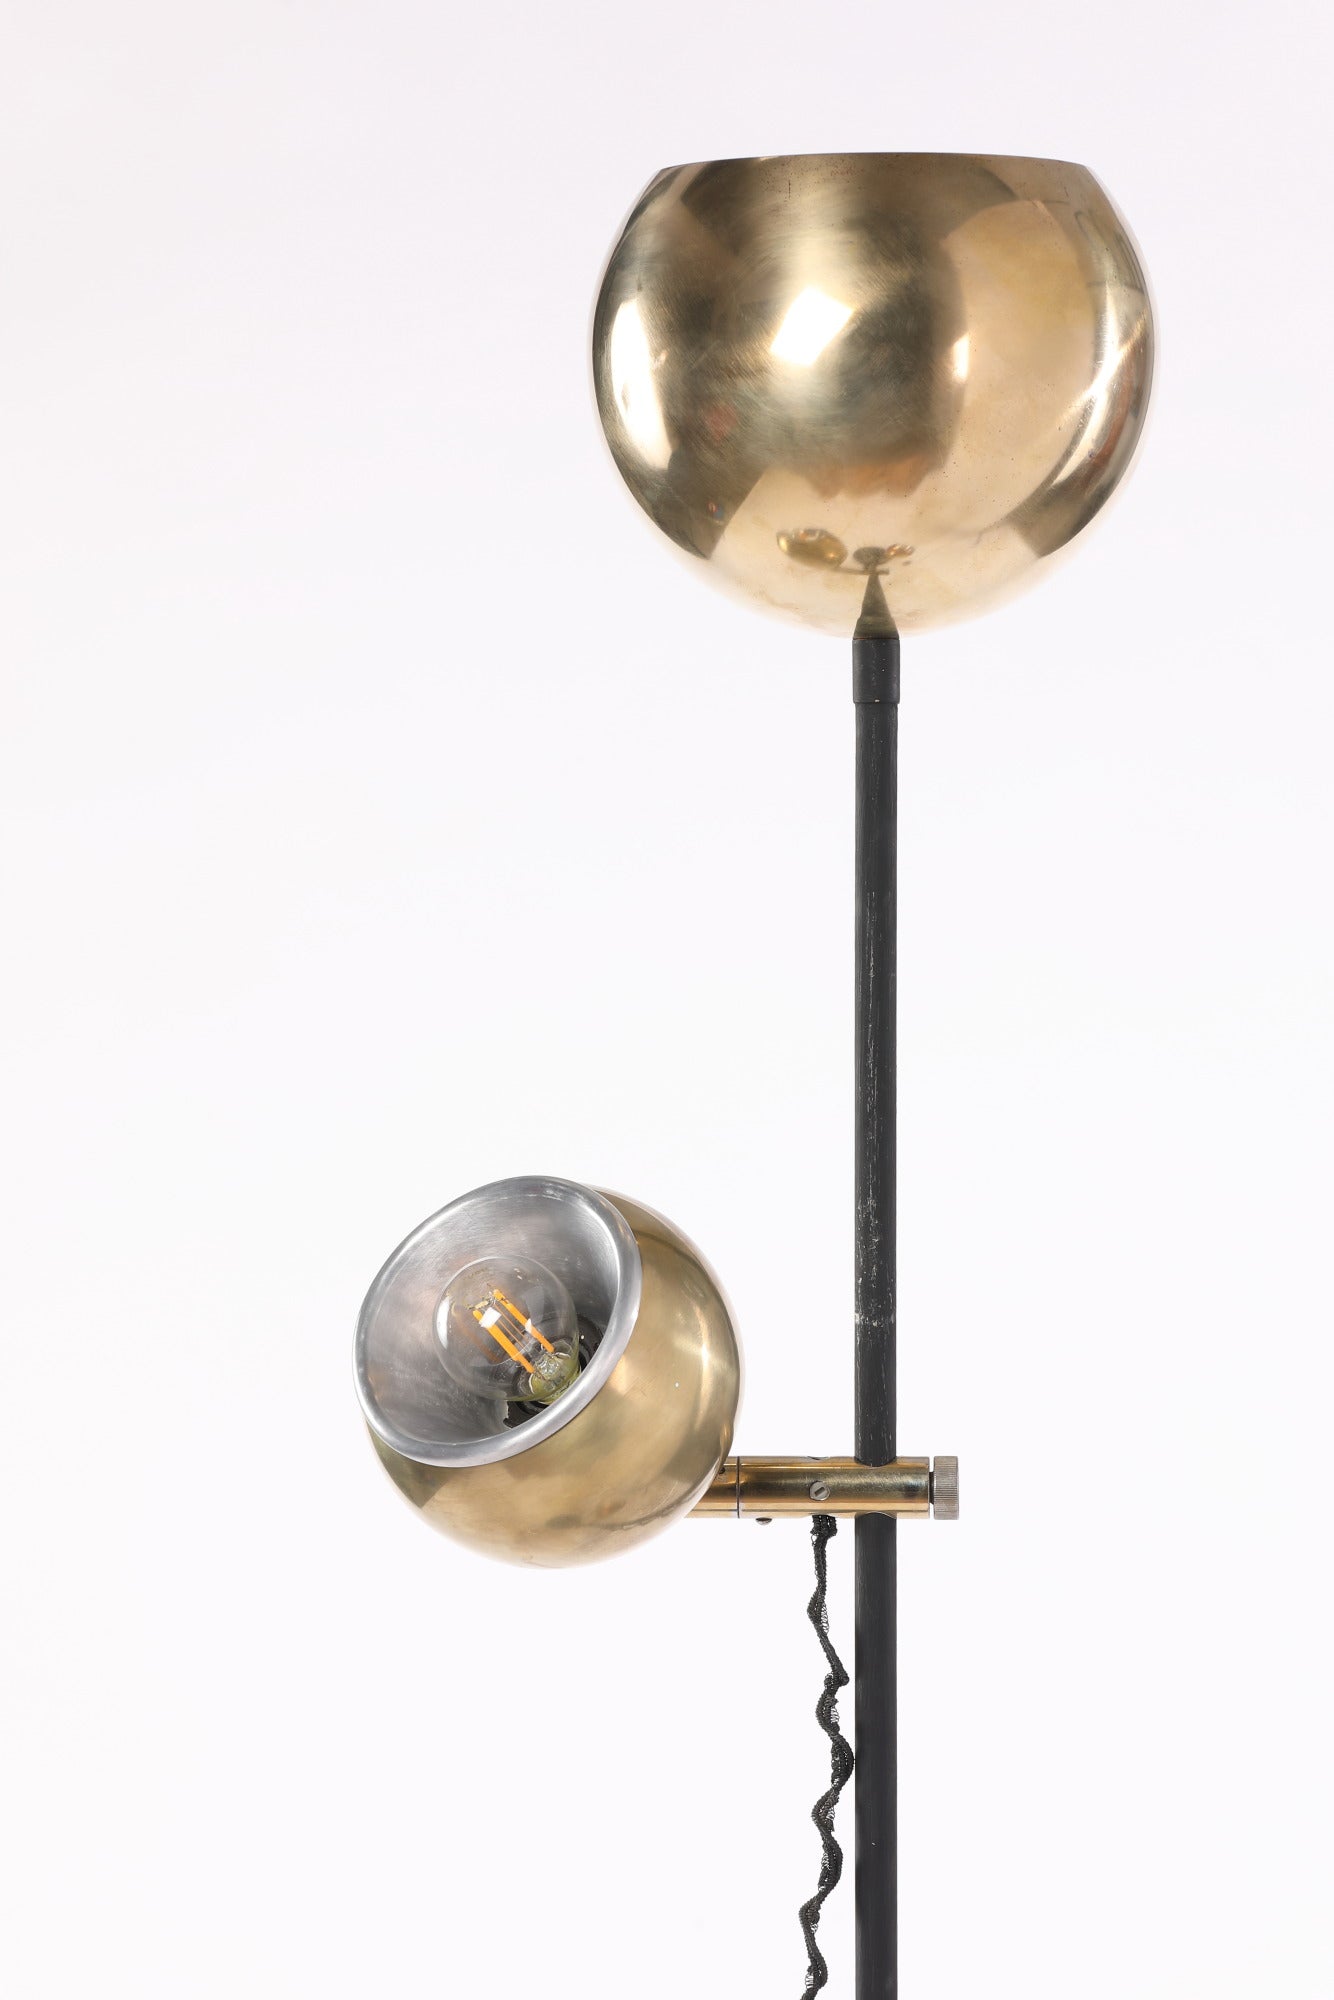 Brass floor lamp by Goffredo Reggiani from the 70s